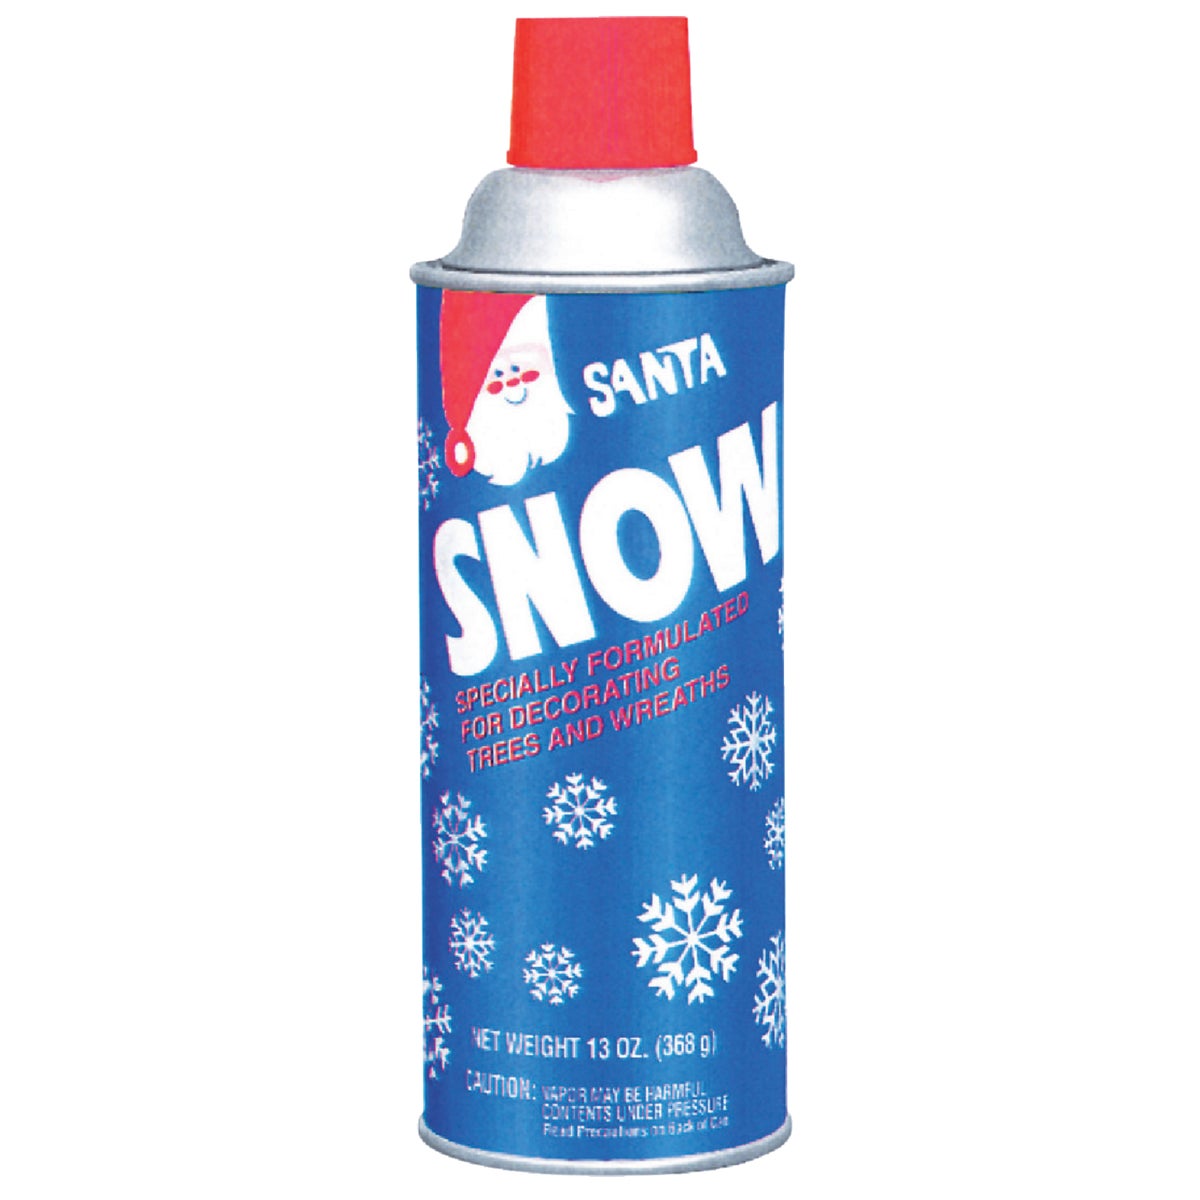 Item 901326, Spray snow for a variety of surfaces and applications.